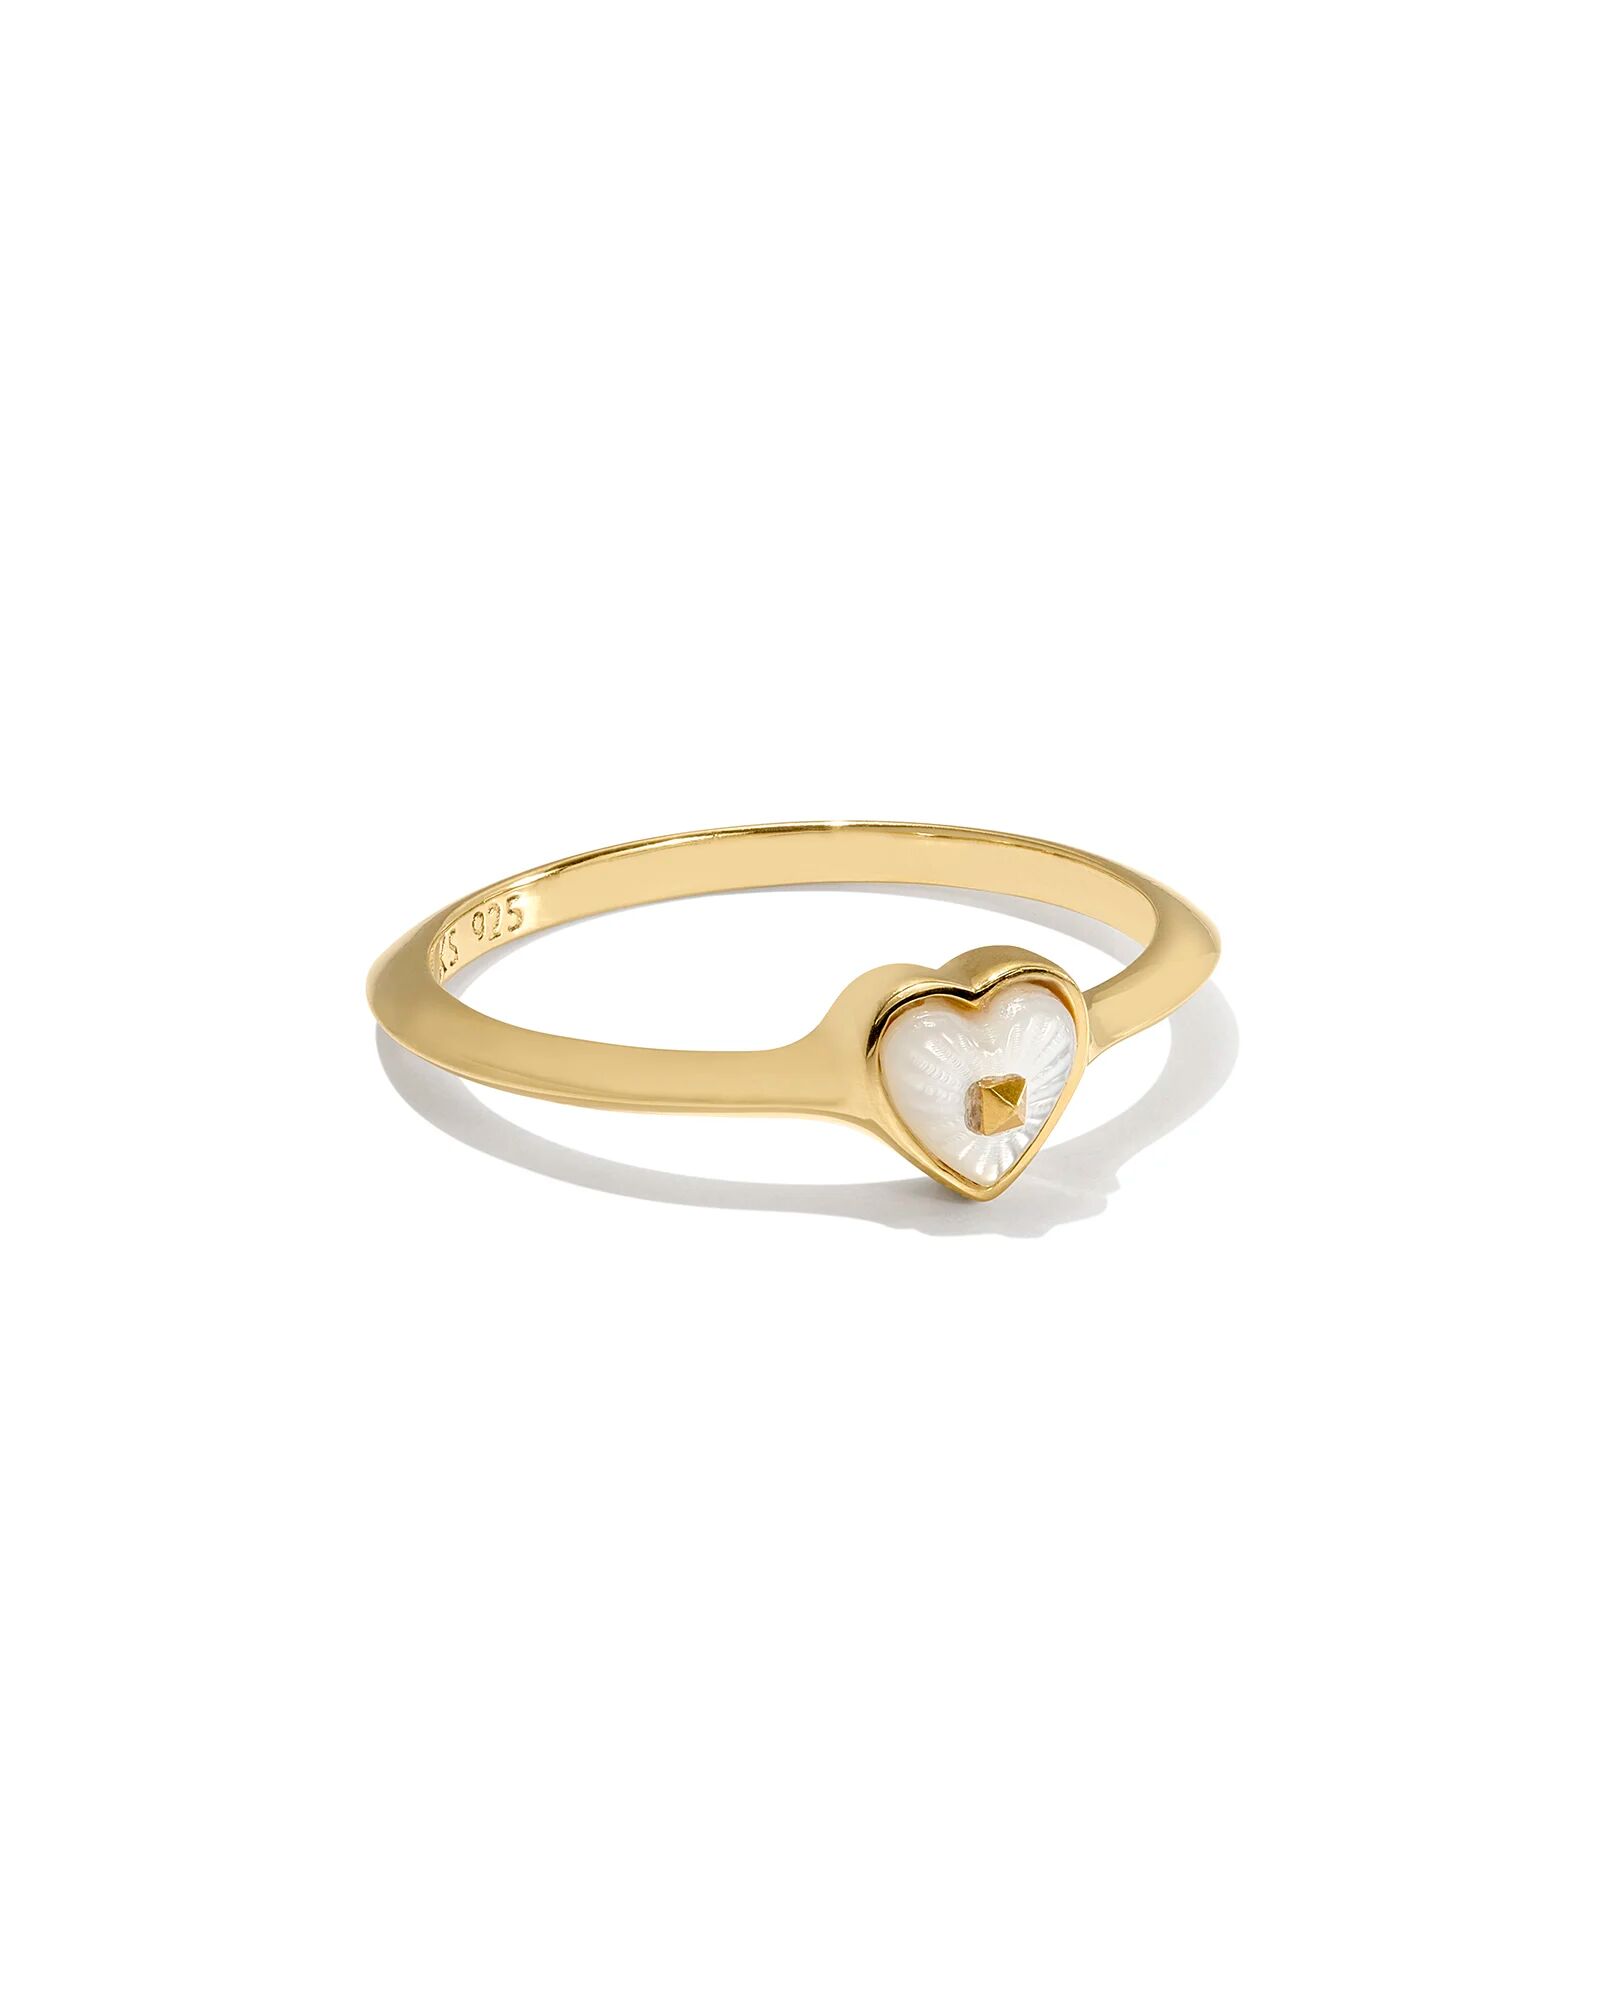 Kendra Scott Adalynn 18k Gold Vermeil Heart Band Ring in Ivory Mother-of-Pearl   Mother Of Pearl   Size 7